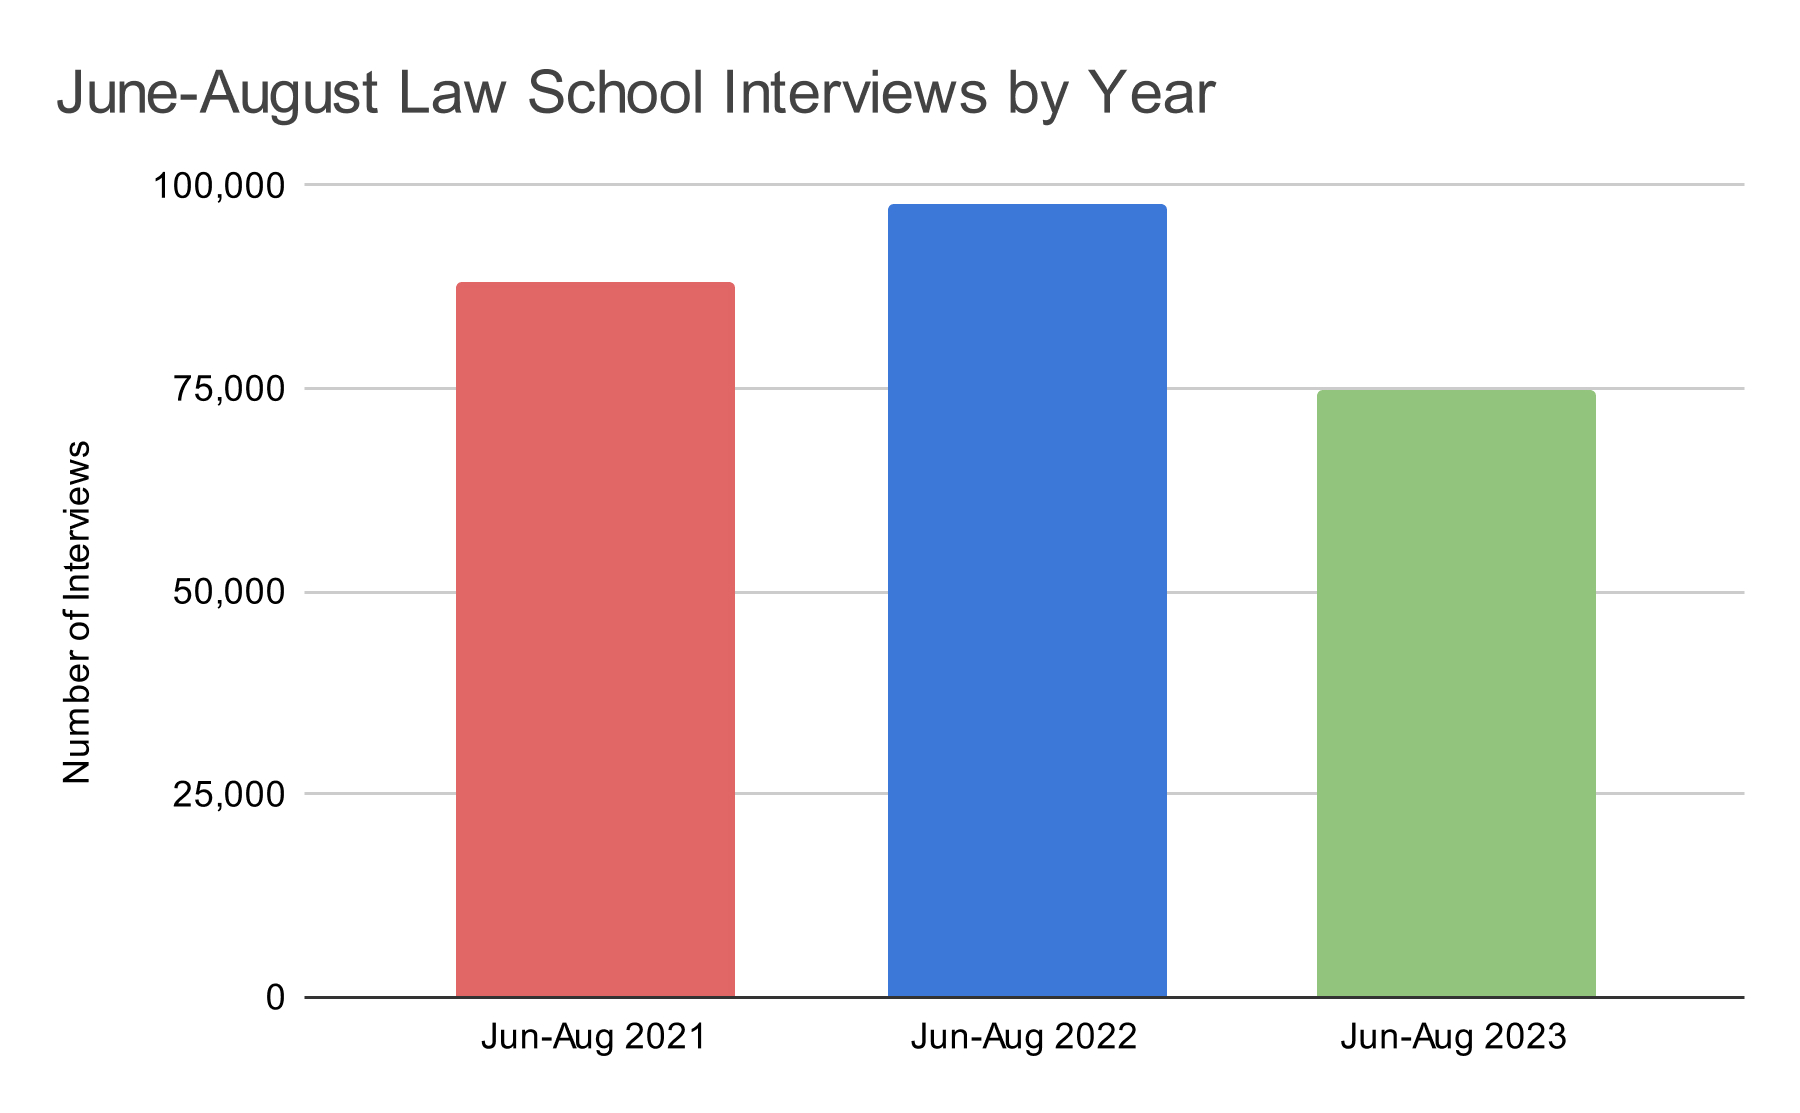 June-August Law School Interviews by Year